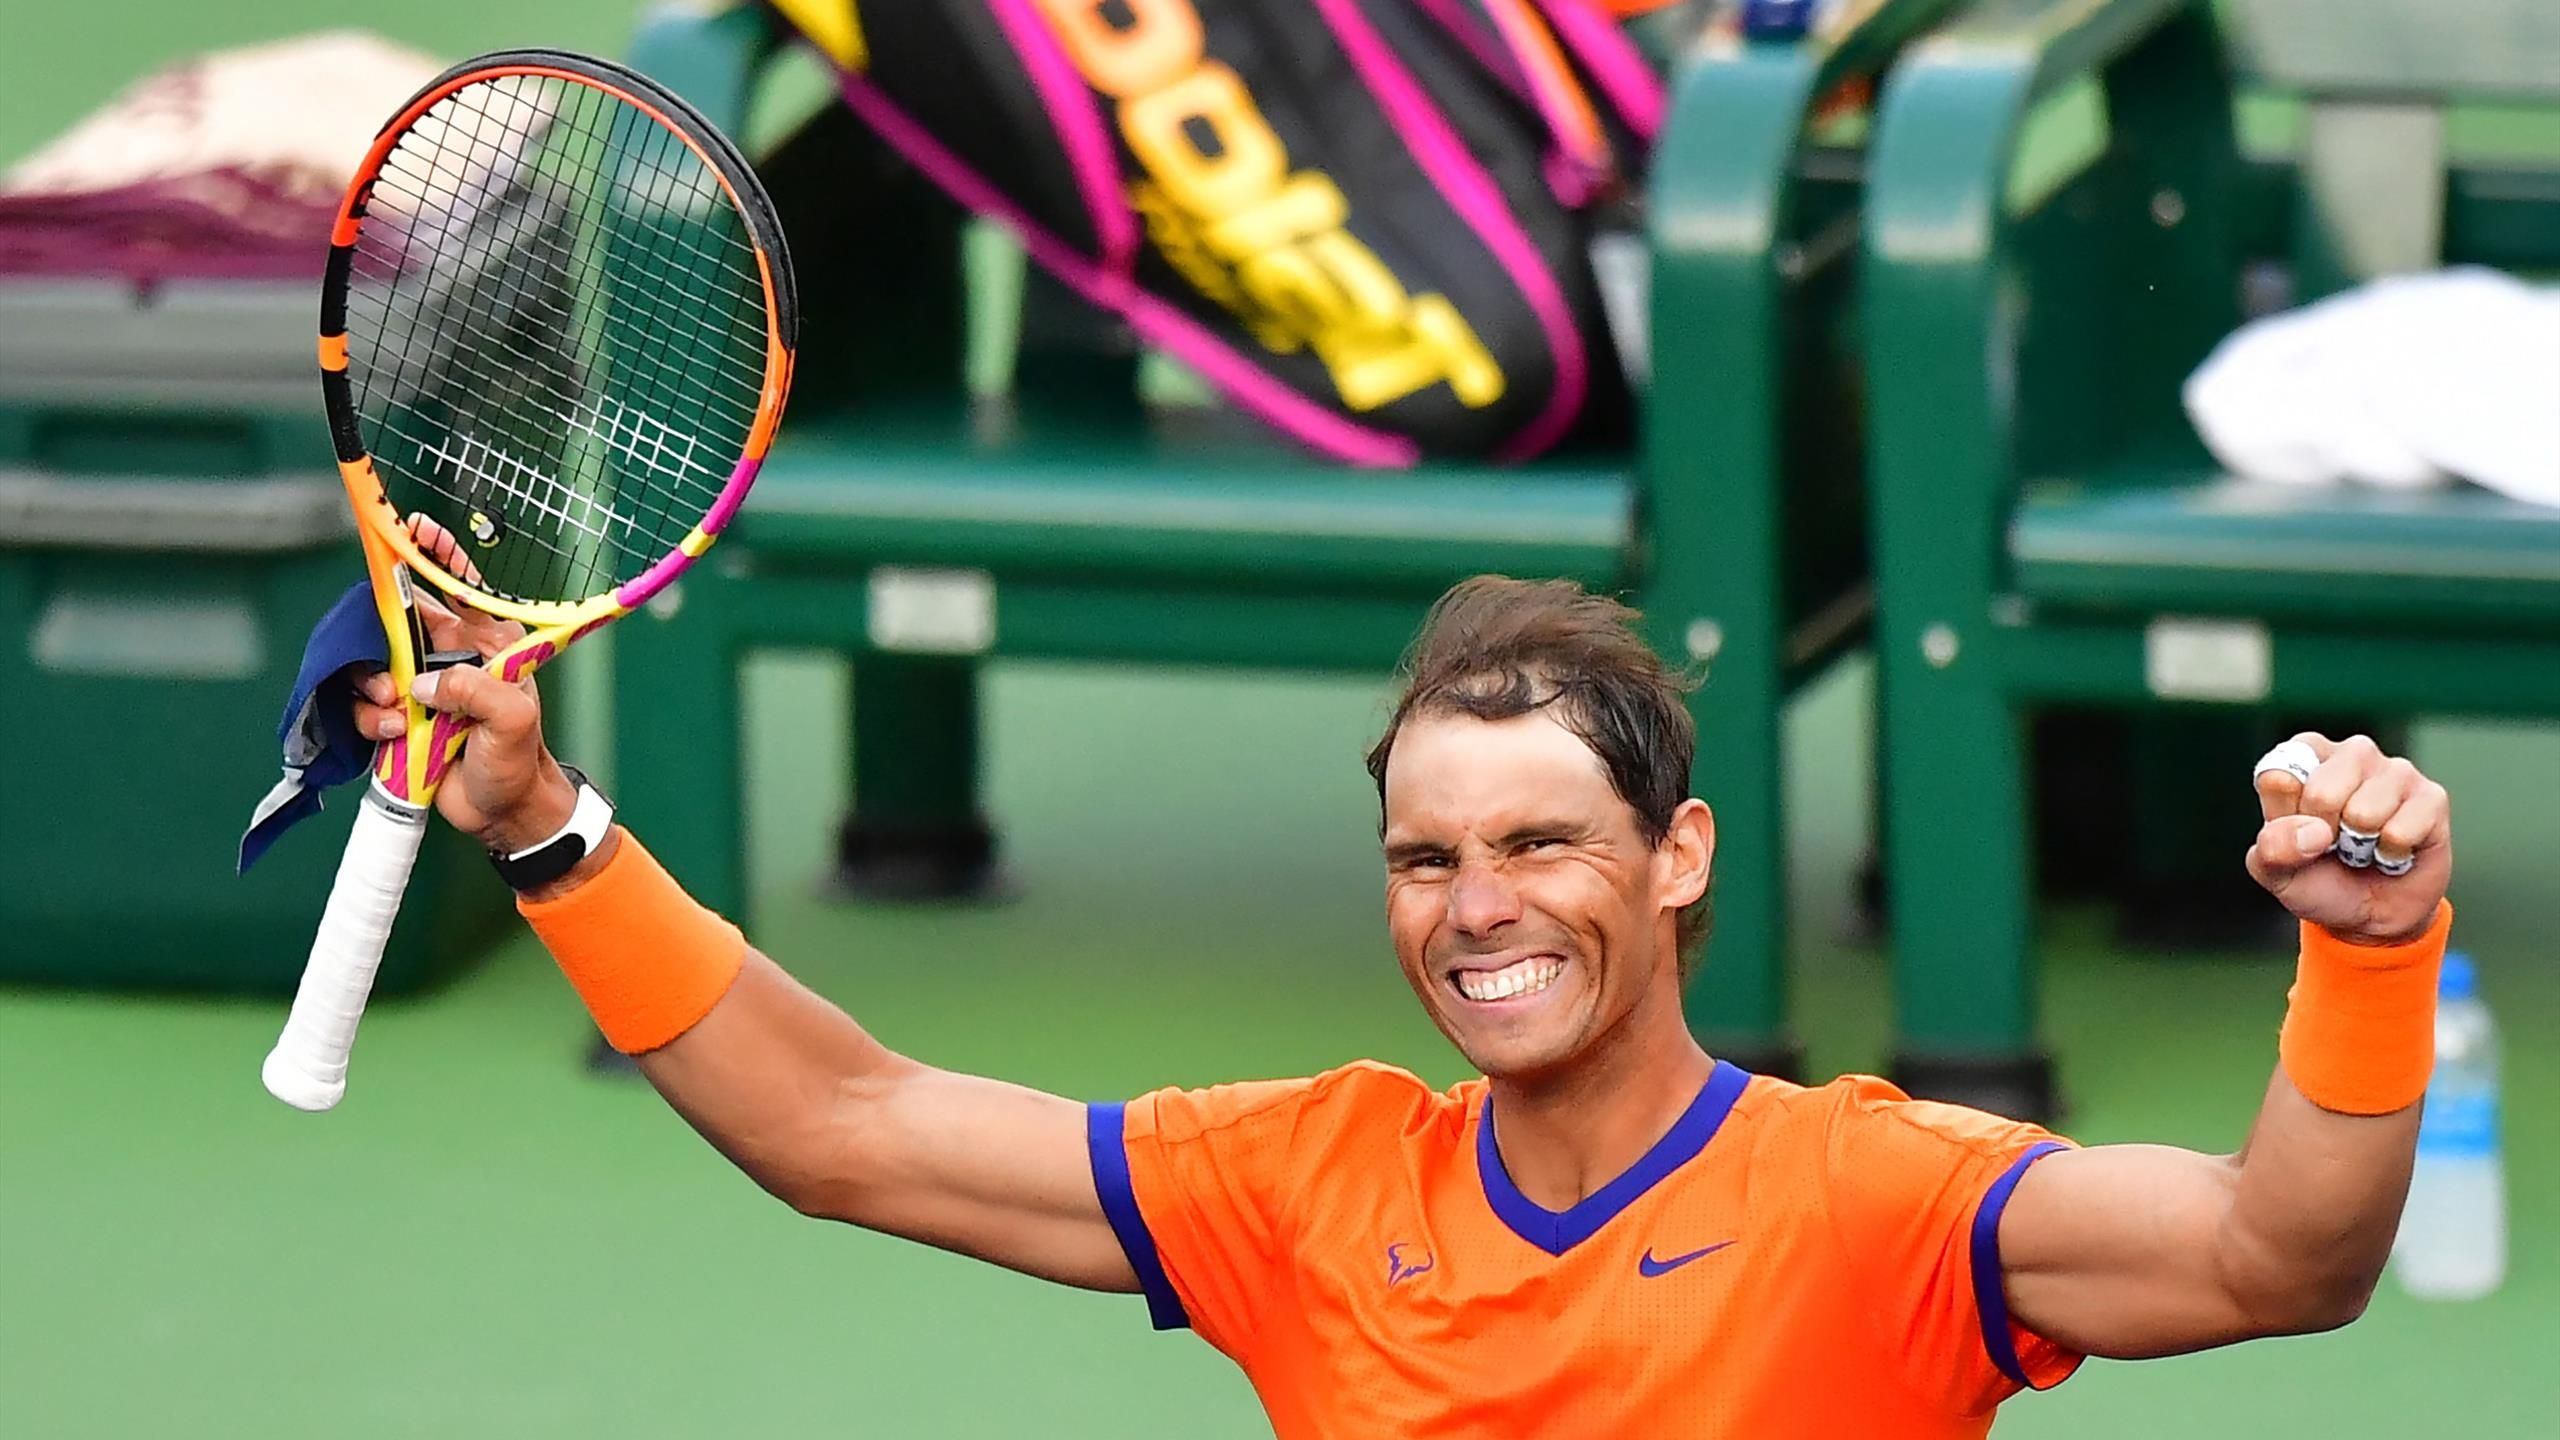 Indian Wells 2022 - Rafael Nadal chalks up his 19th win in a row against a volatile Nick Kyrgios to reach the last four